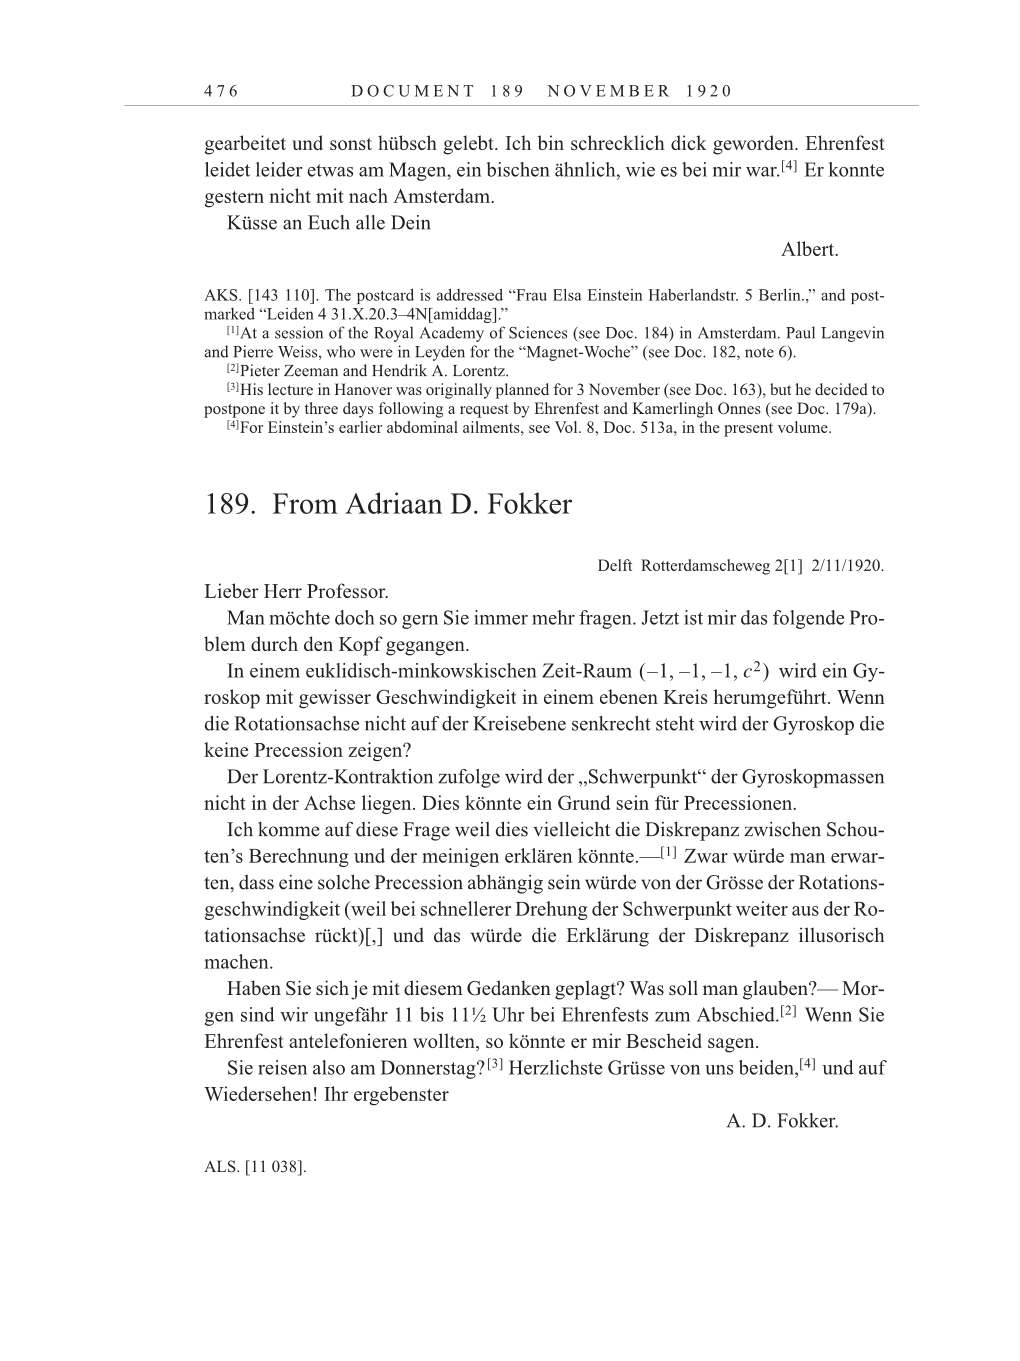 Volume 10: The Berlin Years: Correspondence May-December 1920 / Supplementary Correspondence 1909-1920 page 476